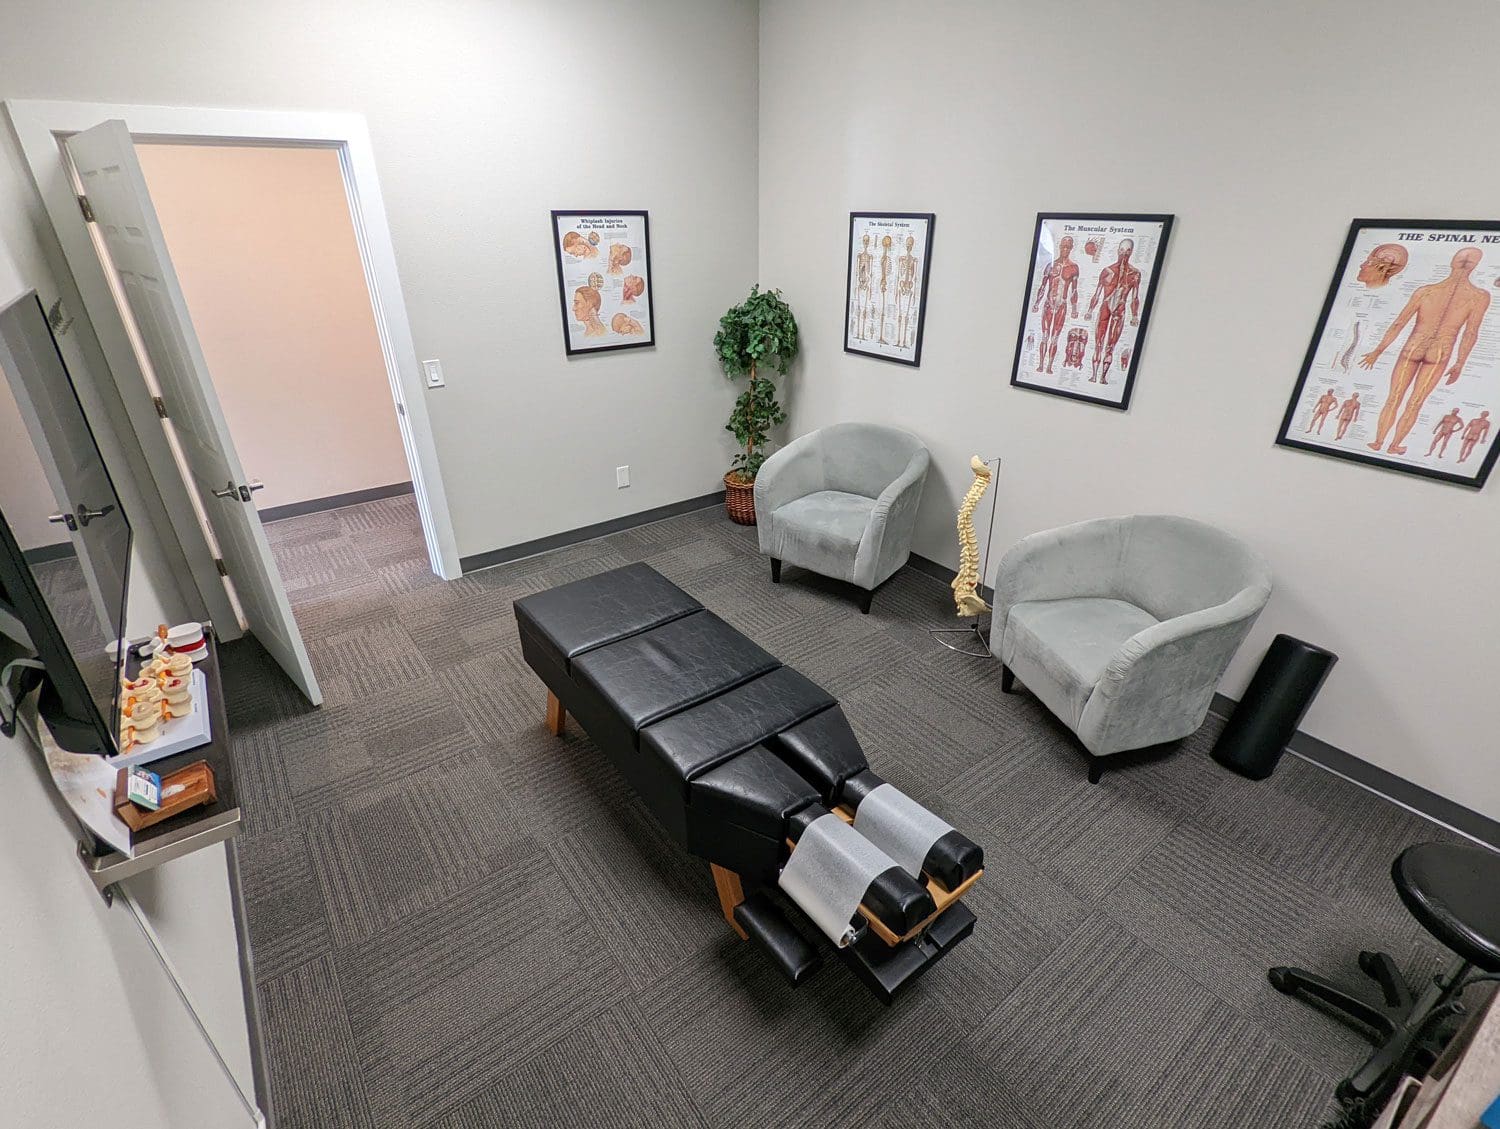 Woodburn chiropractic treatment room with adjustment table and sitting chairs.